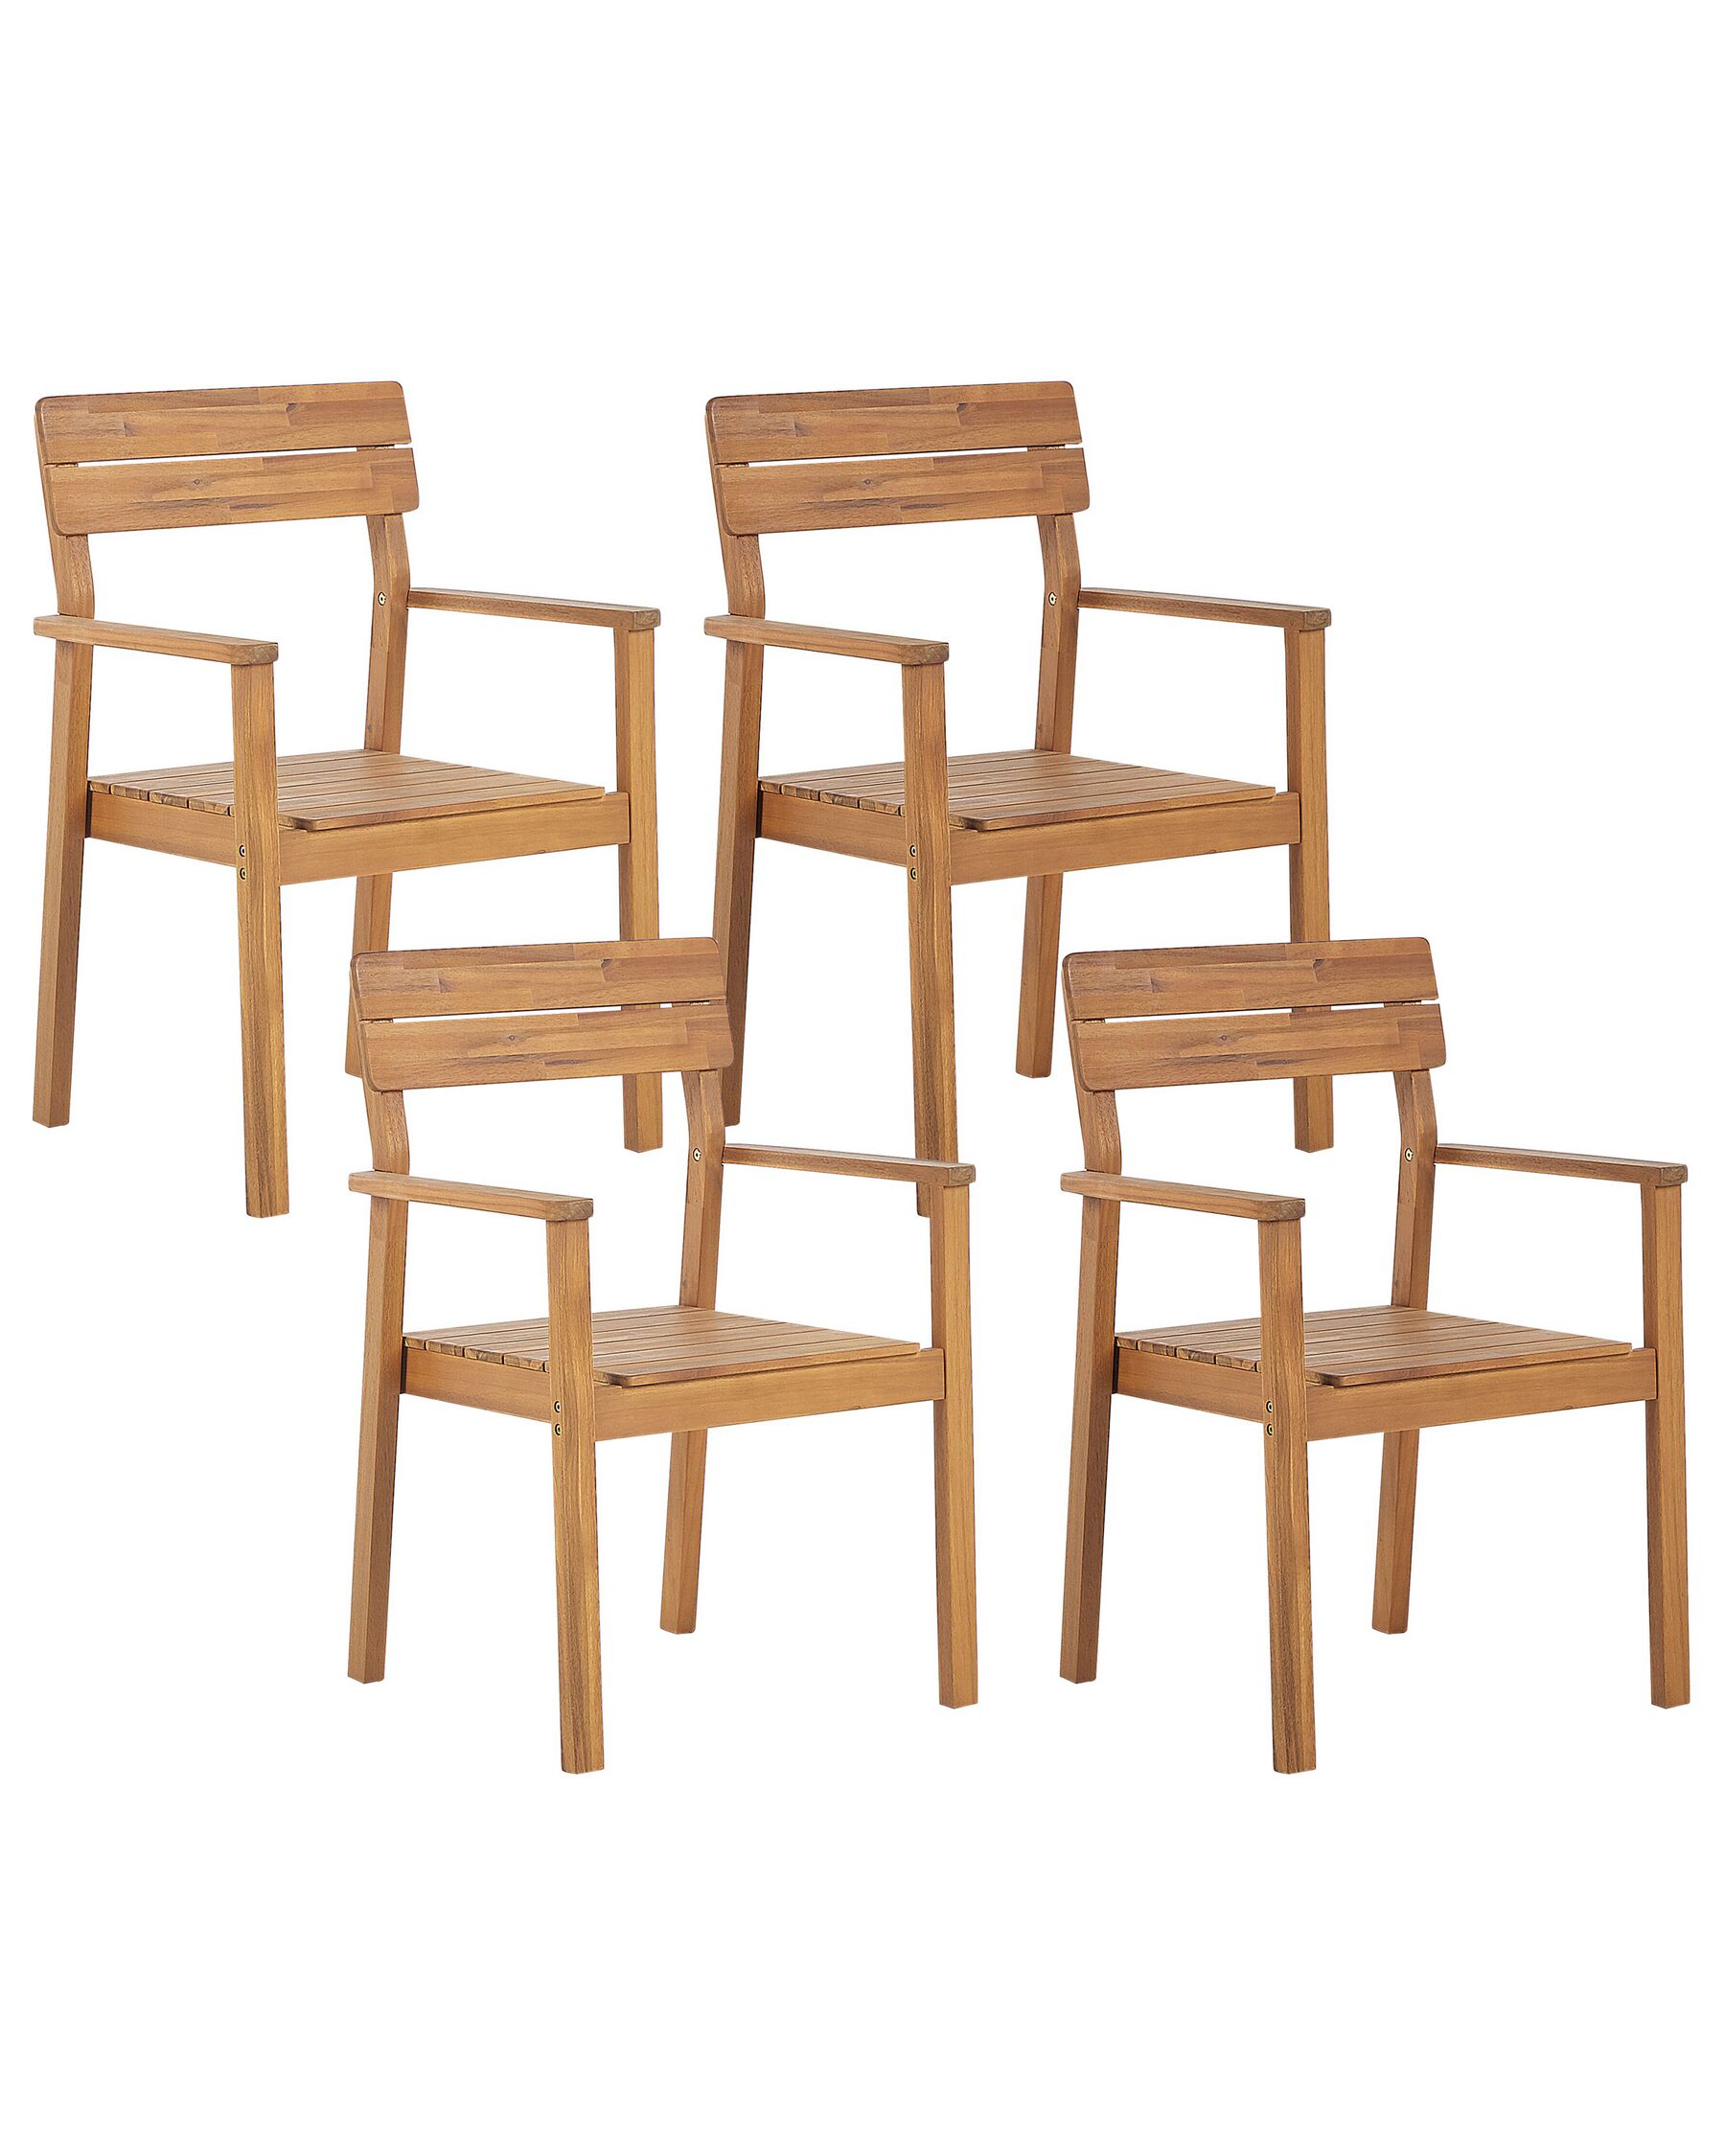 Set of 4 Acacia Wood Garden Chairs FORNELLI_823597